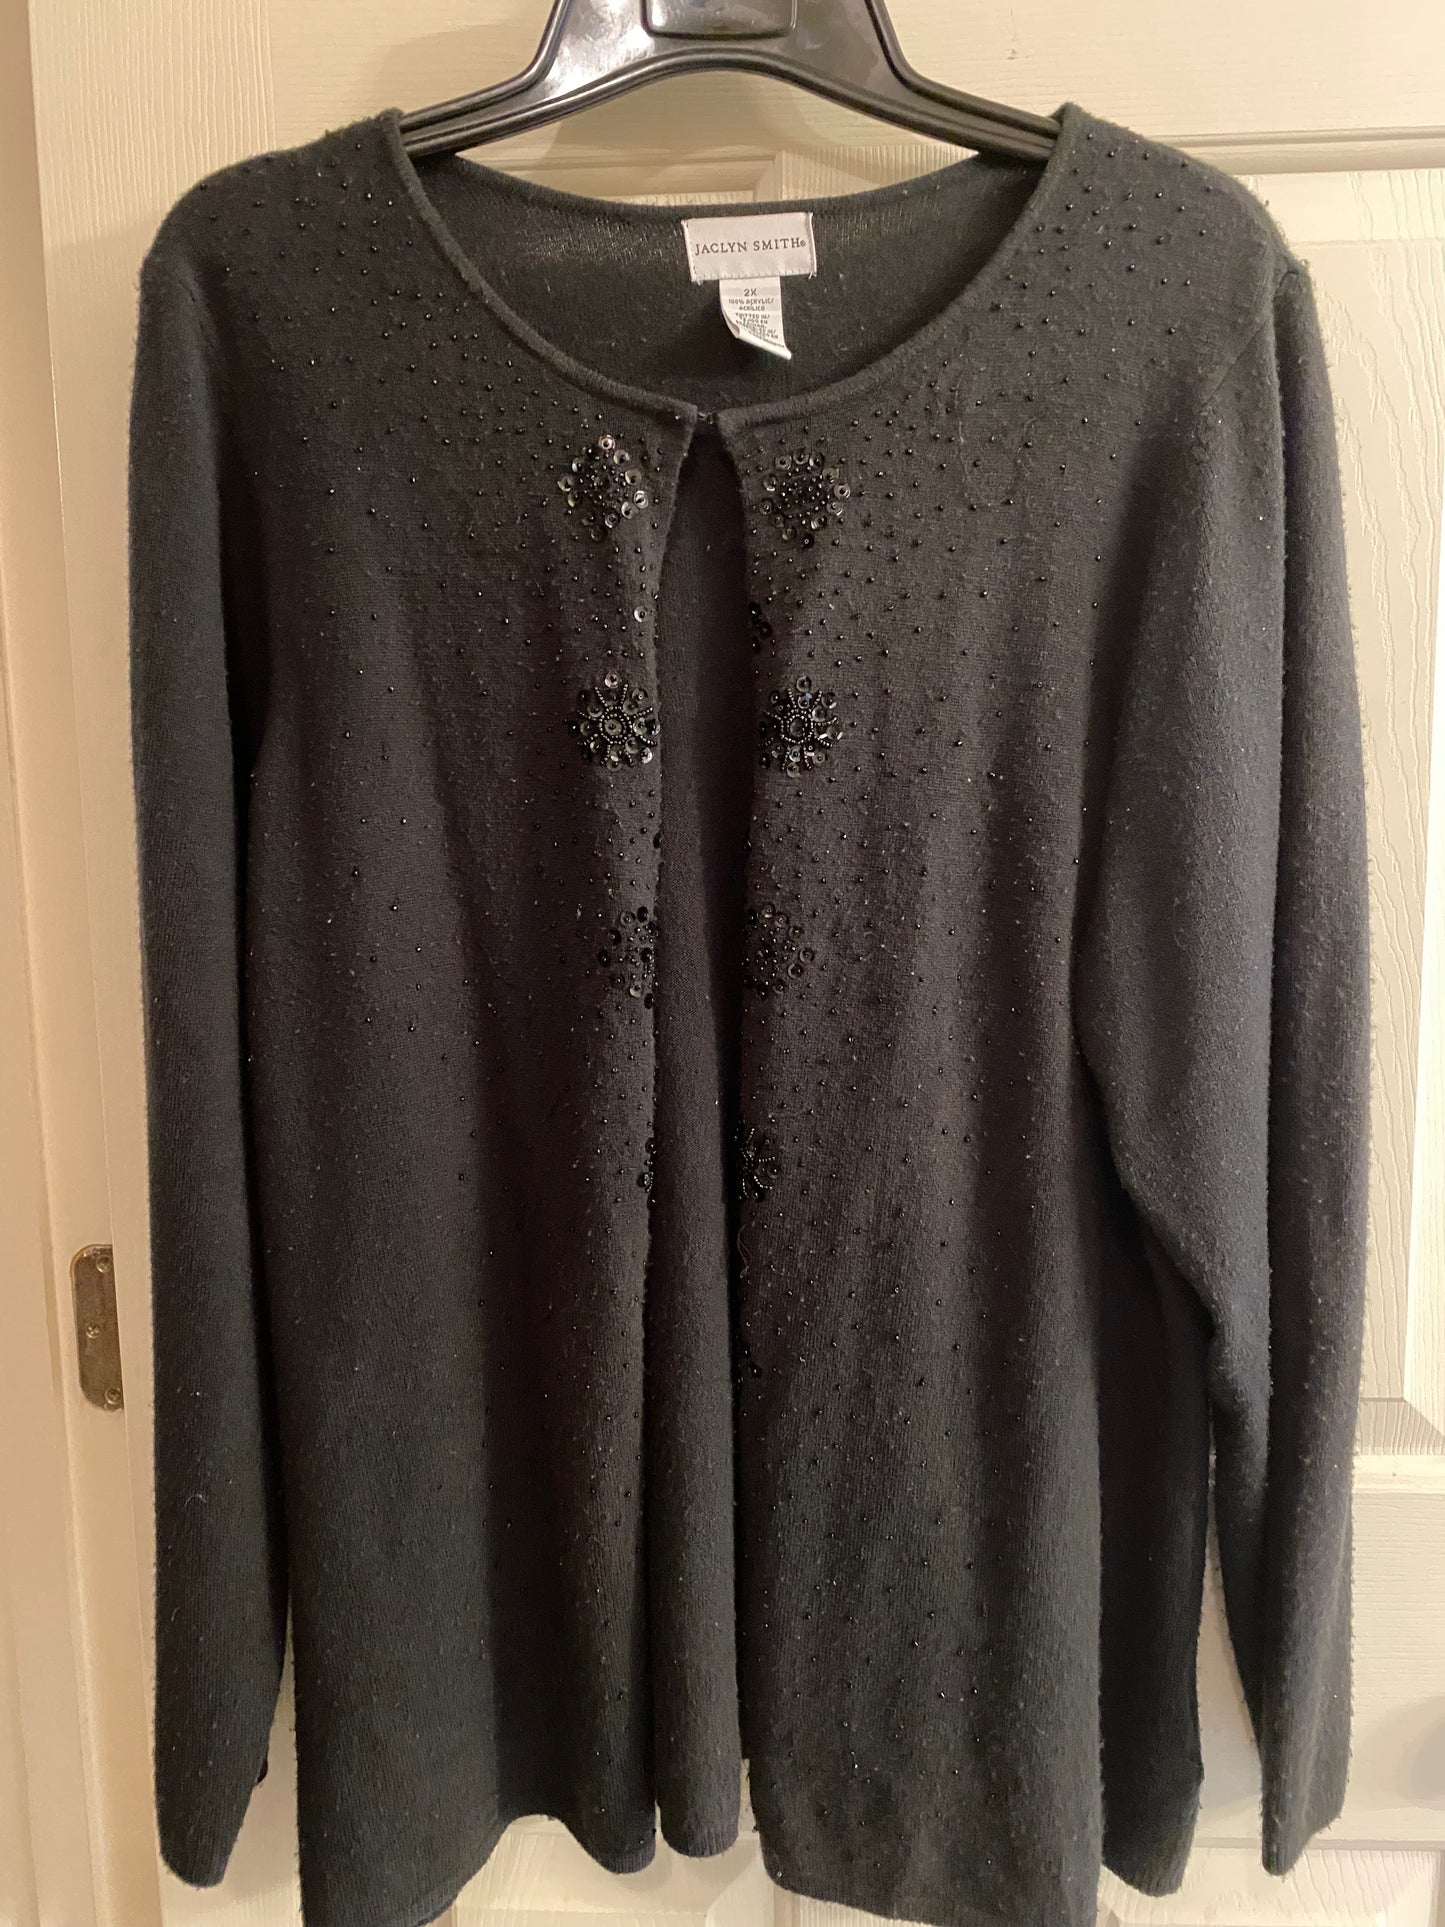 Jaclyn Smith Knitted 100% Acrylic Black Sweater Size 2X